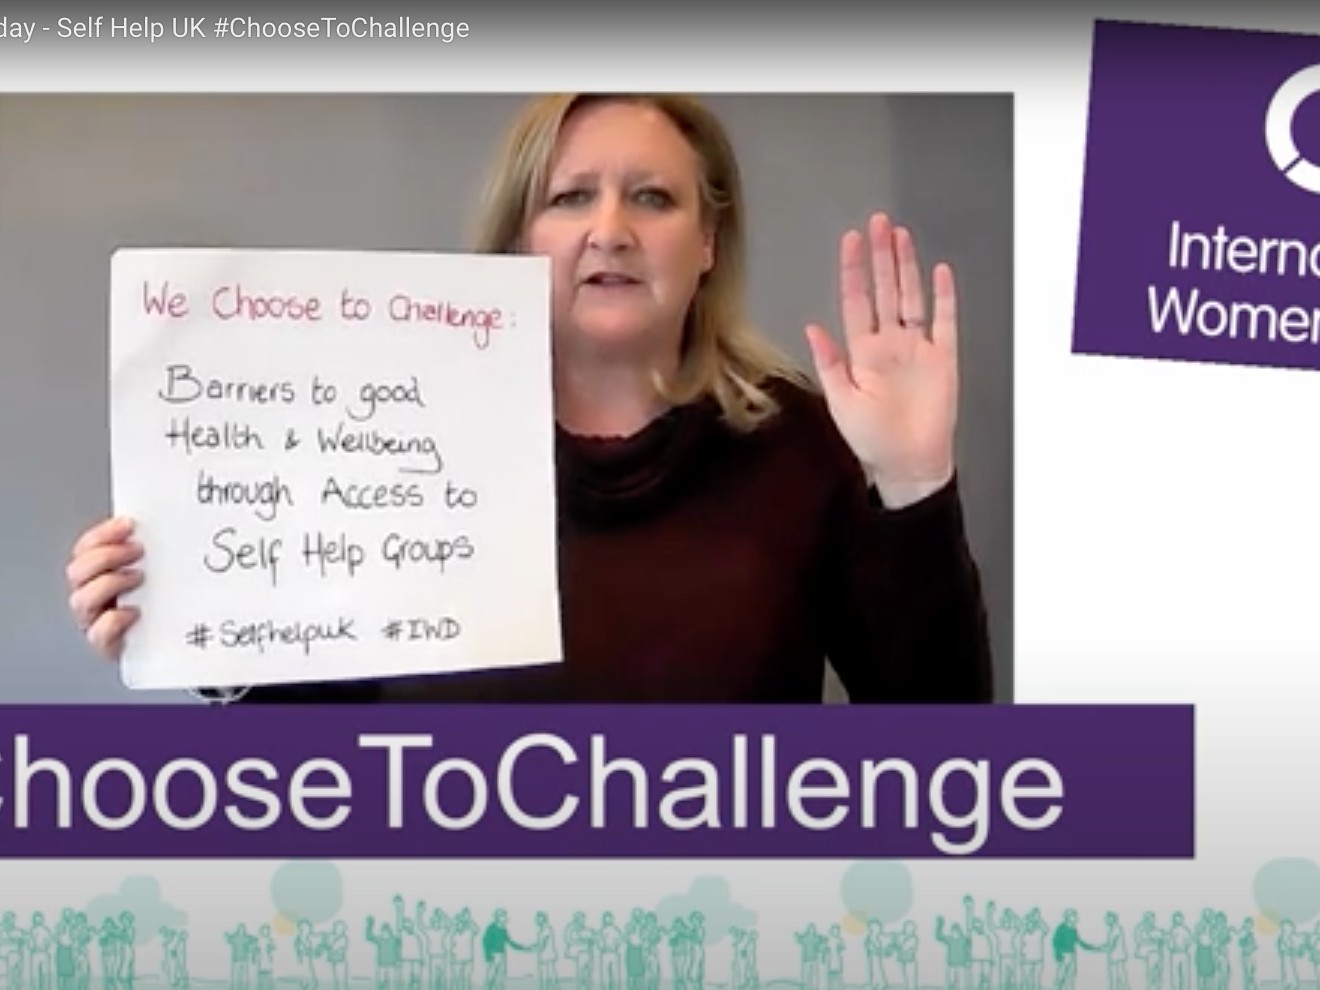 International Women's Day - Sarah CEO chooses to challenge